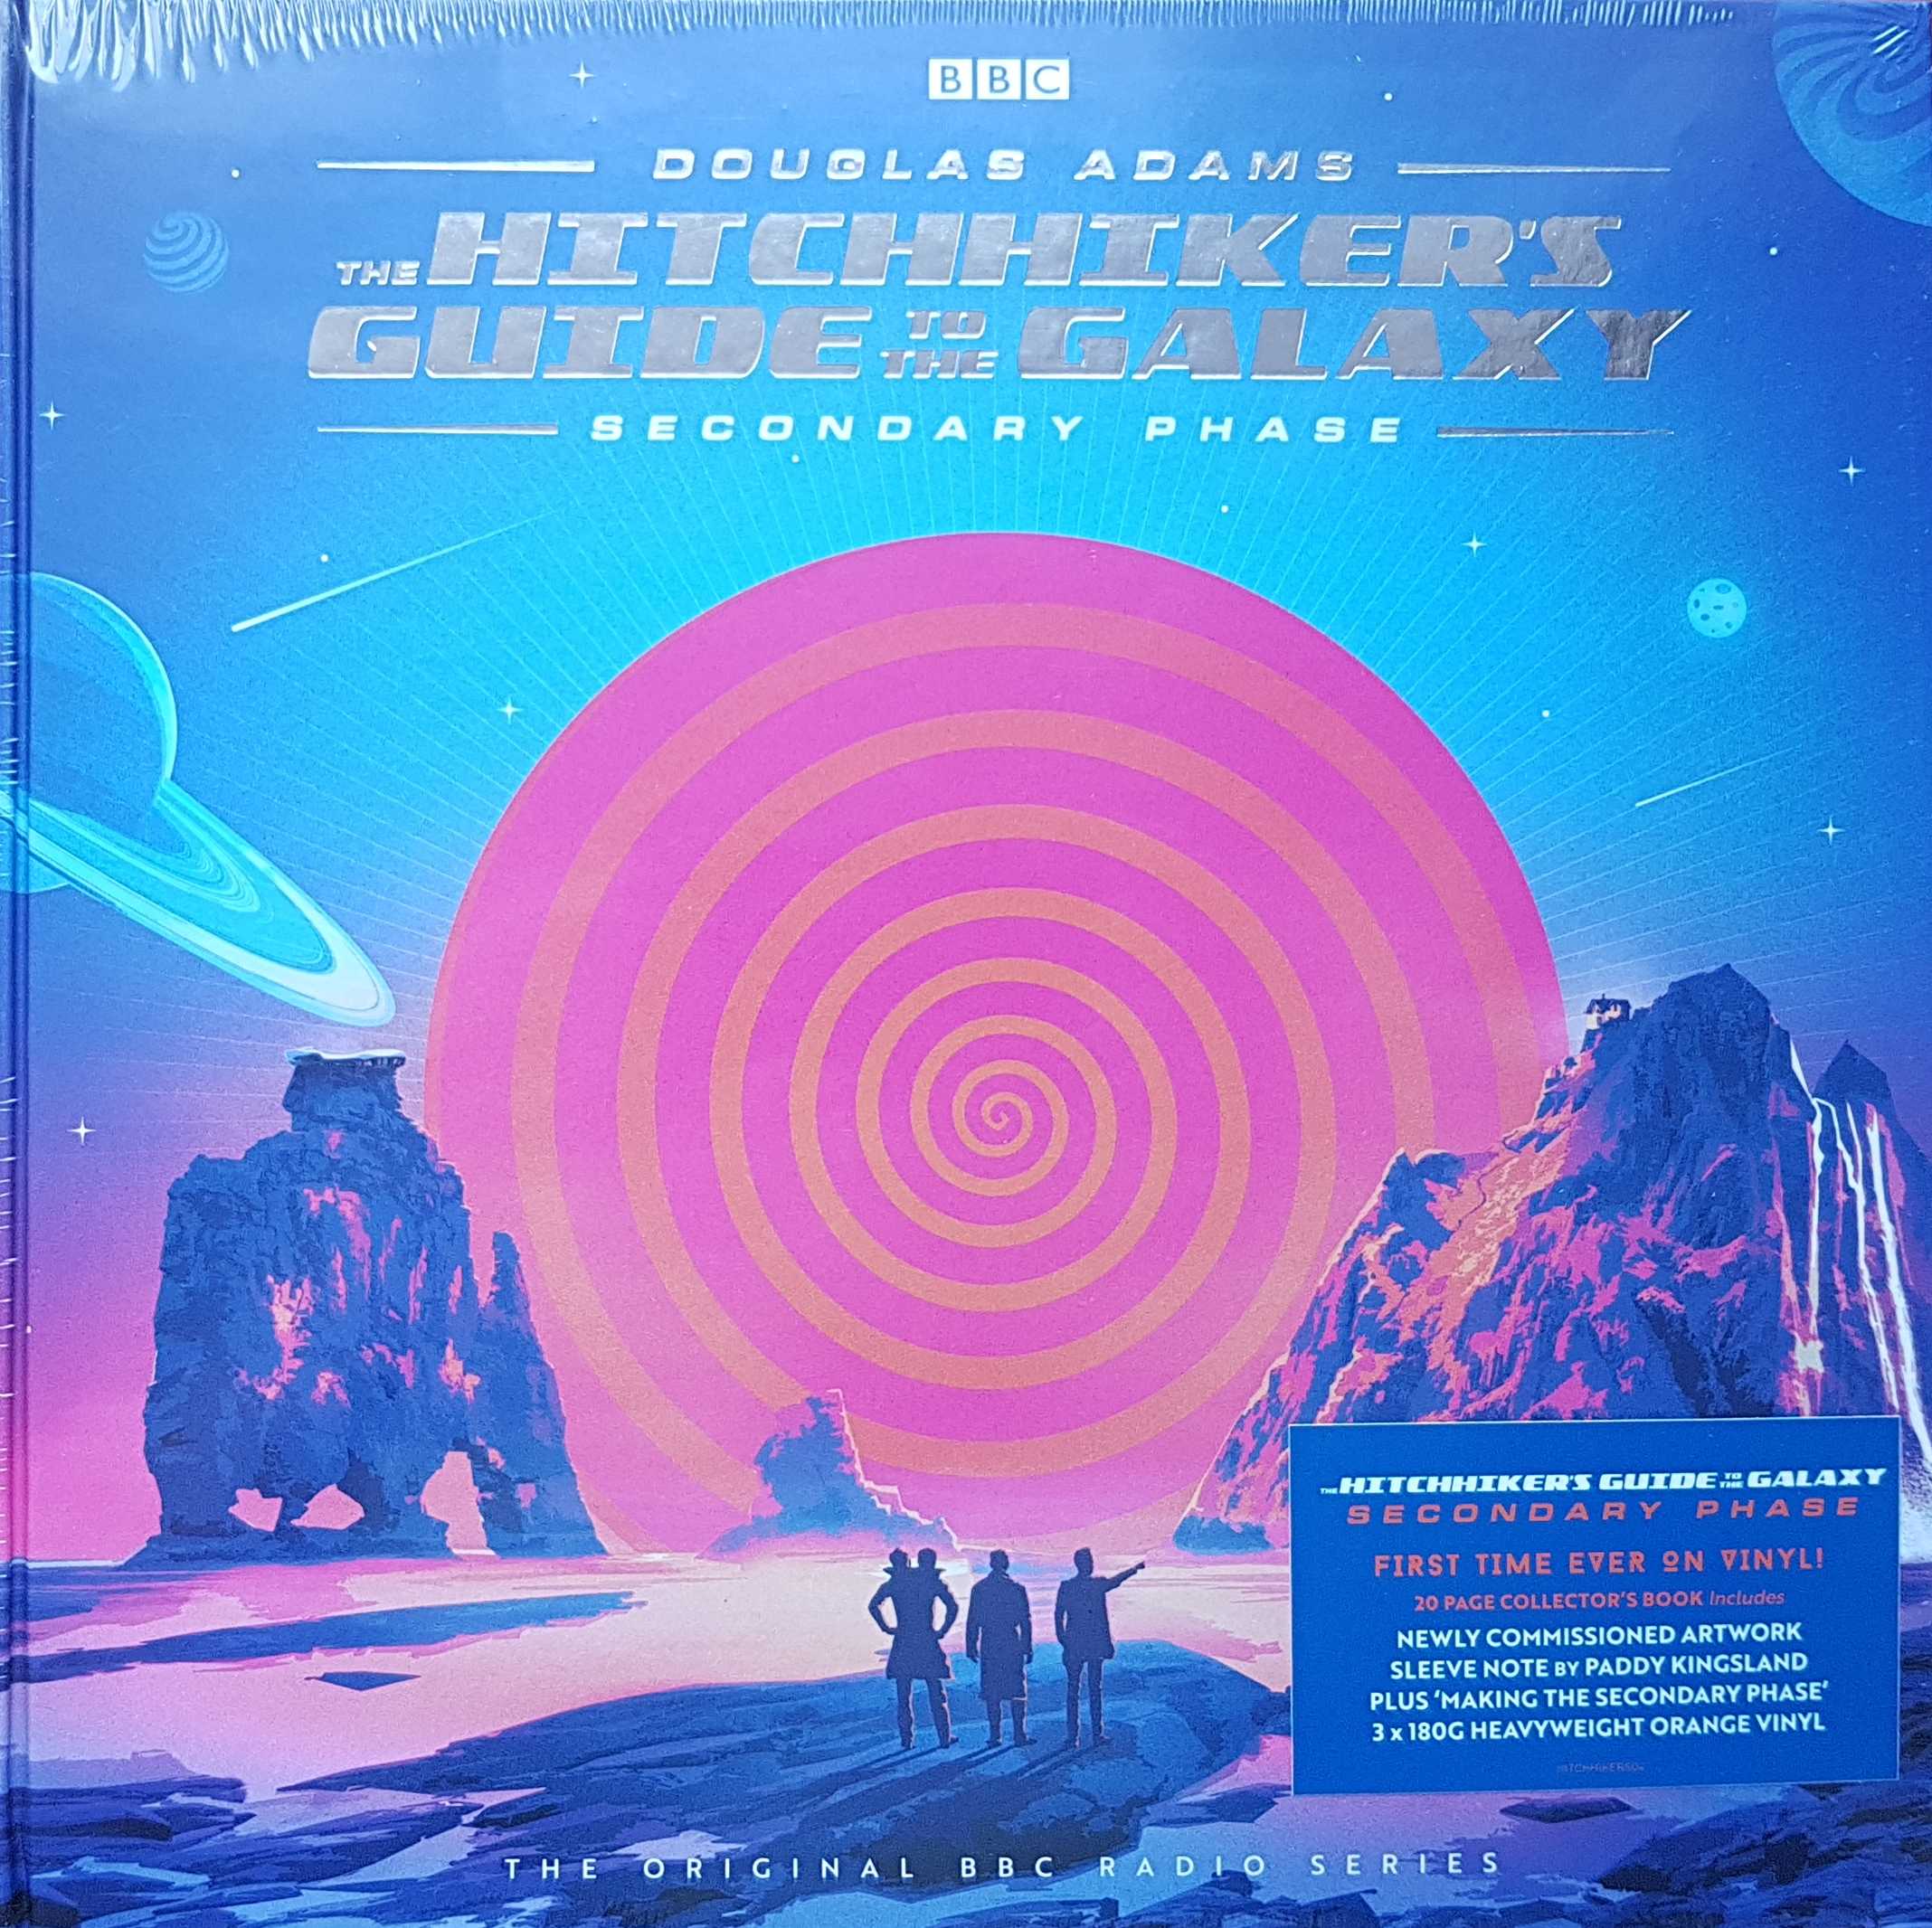 Picture of The hitchhiker's guide to the galaxy - Secondary phrase by artist Douglas Adams from the BBC albums - Records and Tapes library